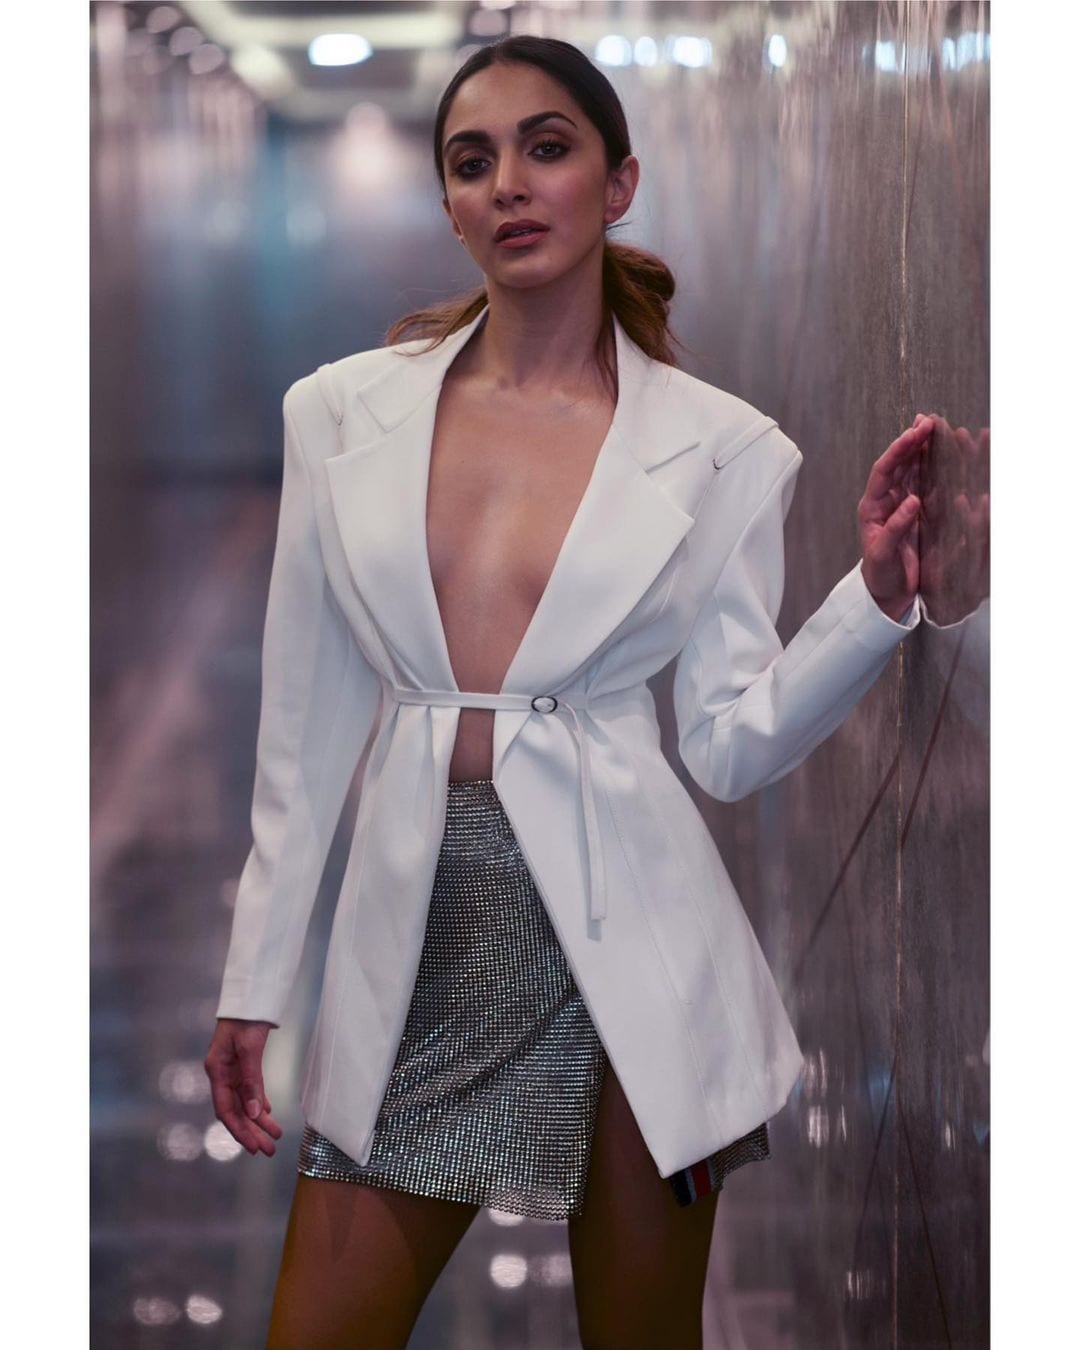 Kiara Advani looked chic and sexy in a Jacquemus white jacket paired with a Monisha Jaisingh mini skirt.